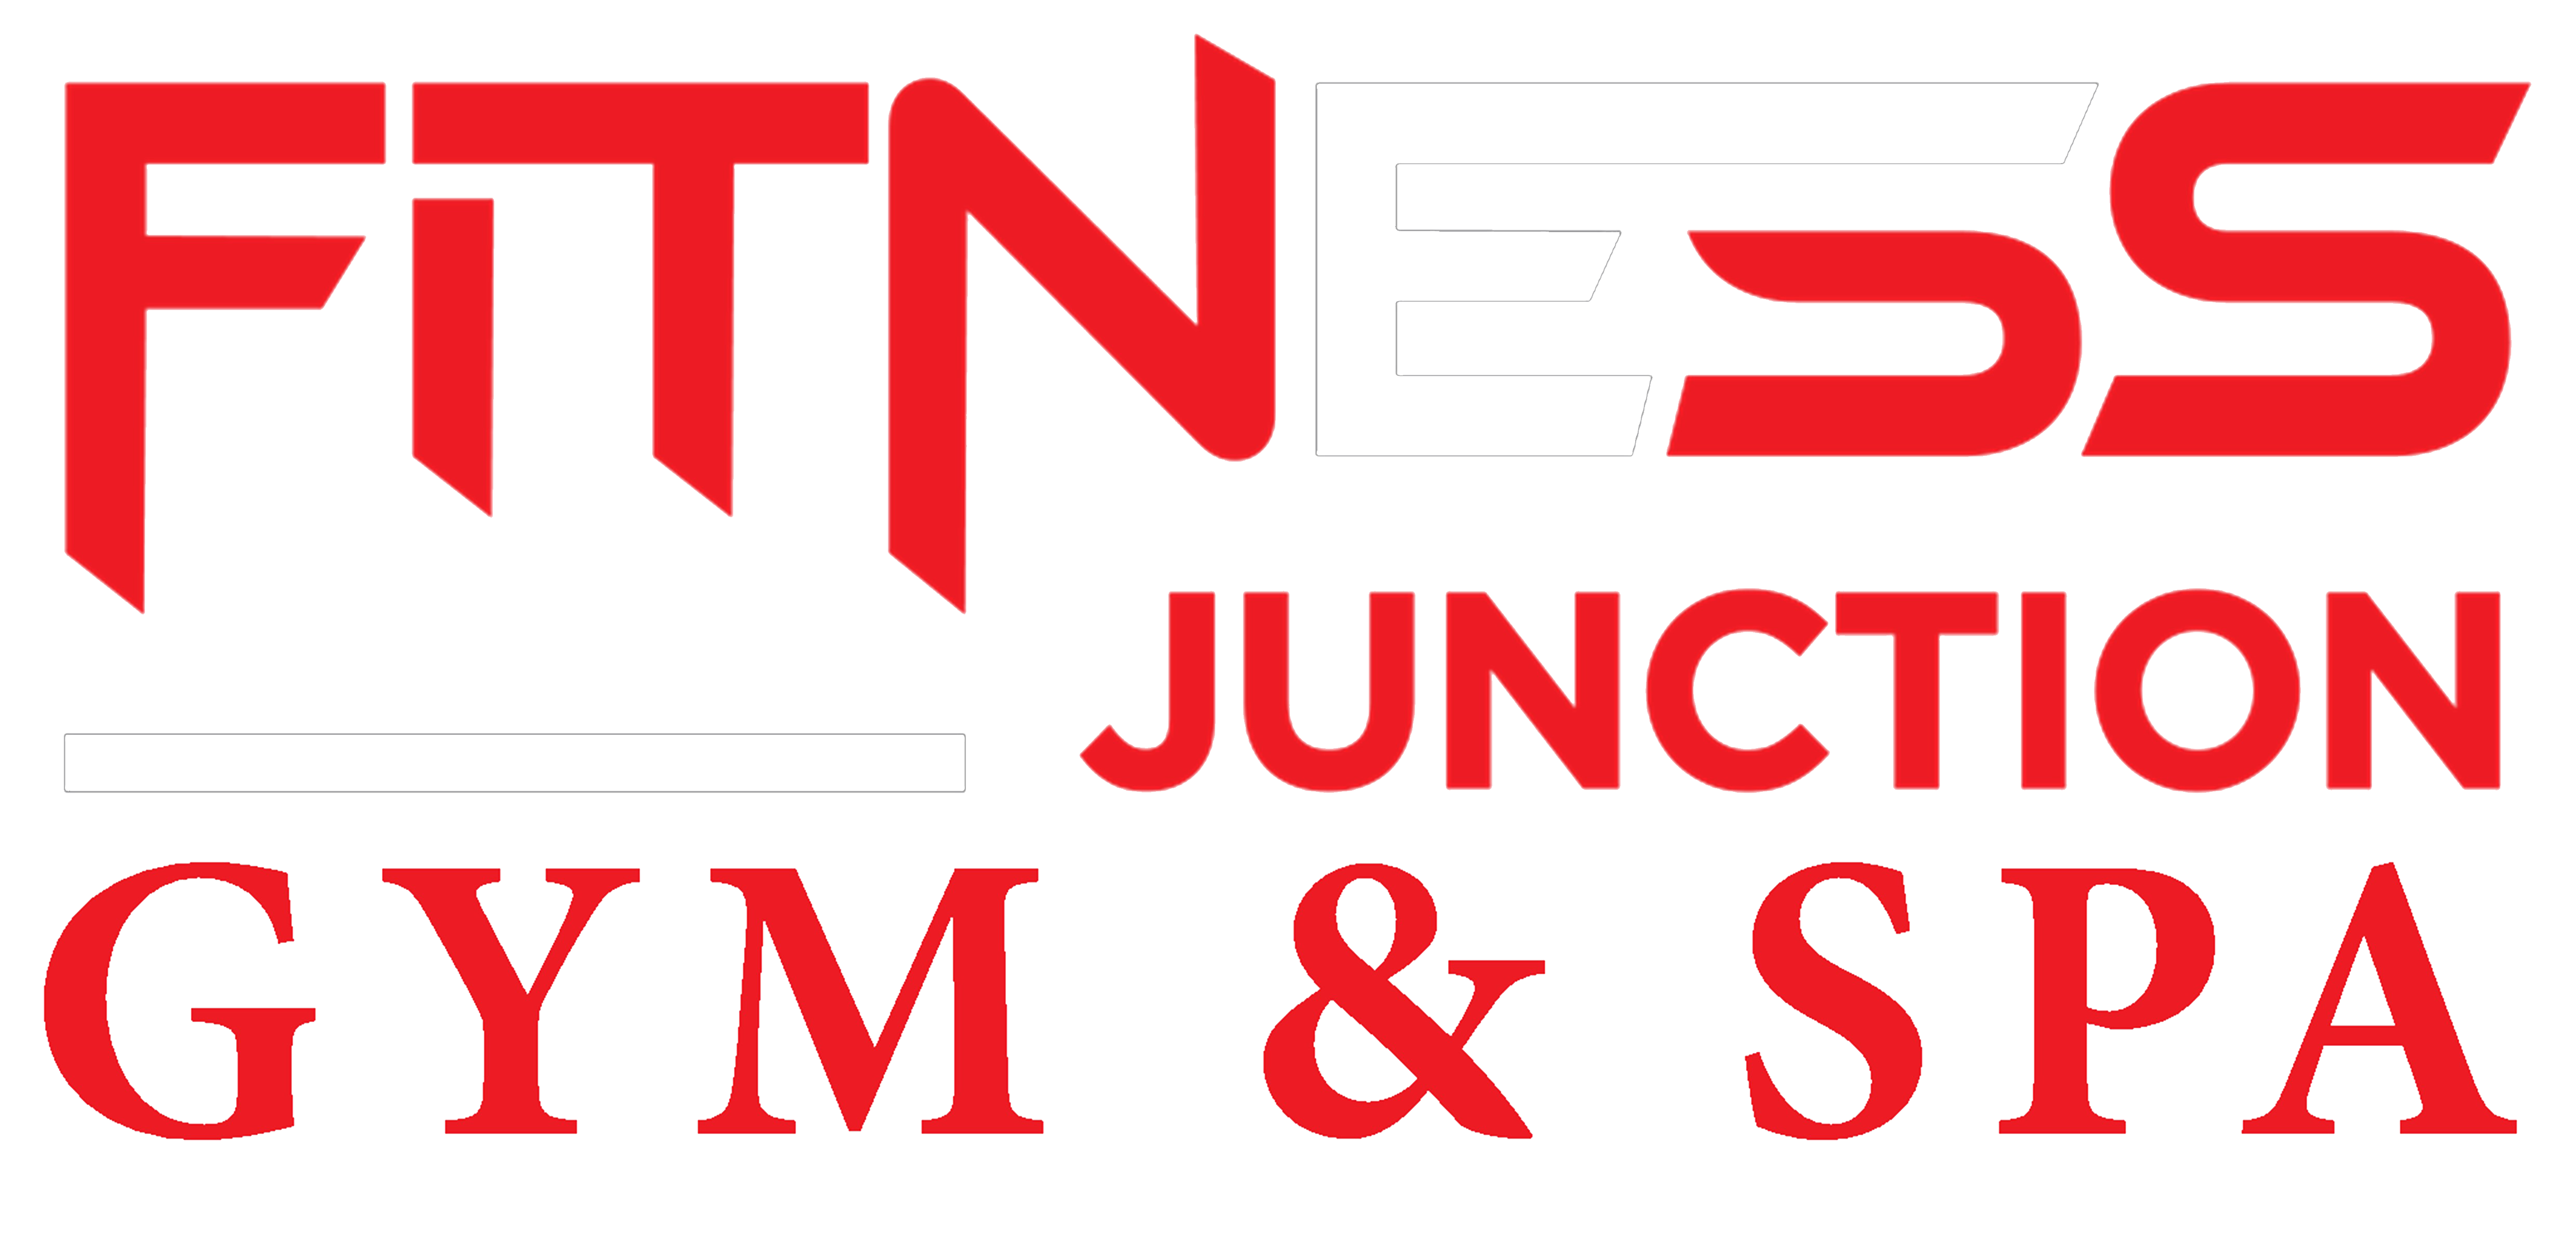 Fitness Junction Gym & Spa